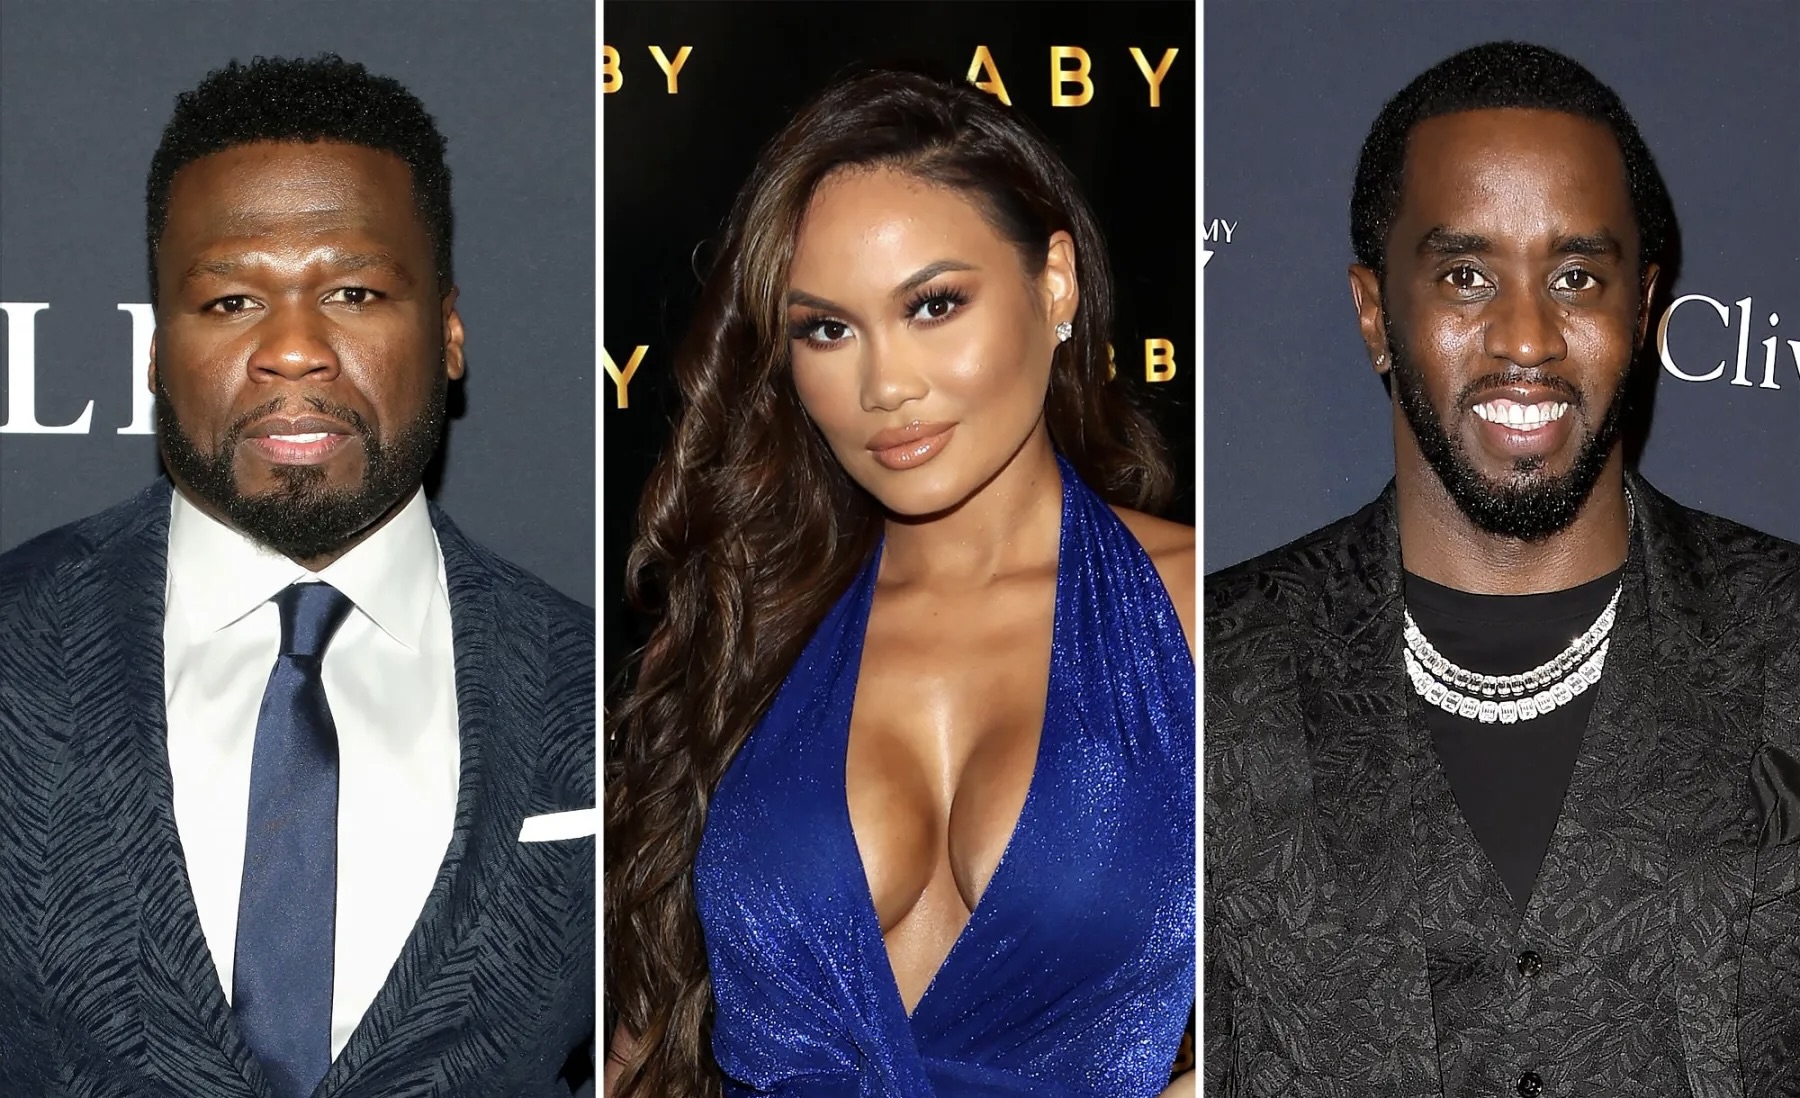 50 Cent Reacts to Ex Daphne Joy being Named as an Alleged Sex Worker in Sean ‘Diddy’ Combs Lawsuit